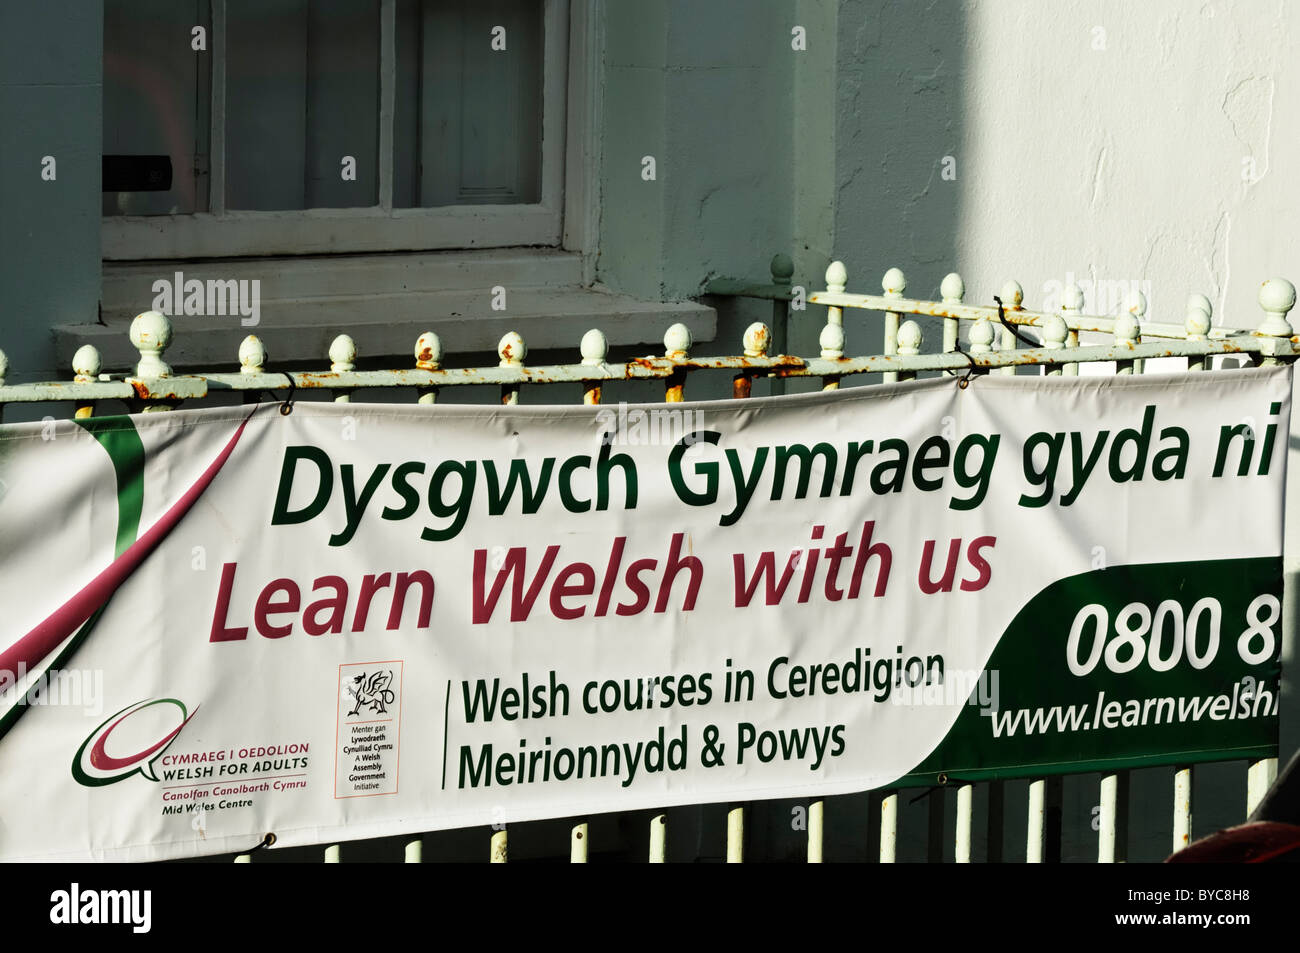 Bilingual sign advertising Welsh language courses for adult learners in Aberystwyth, Wales Stock Photo